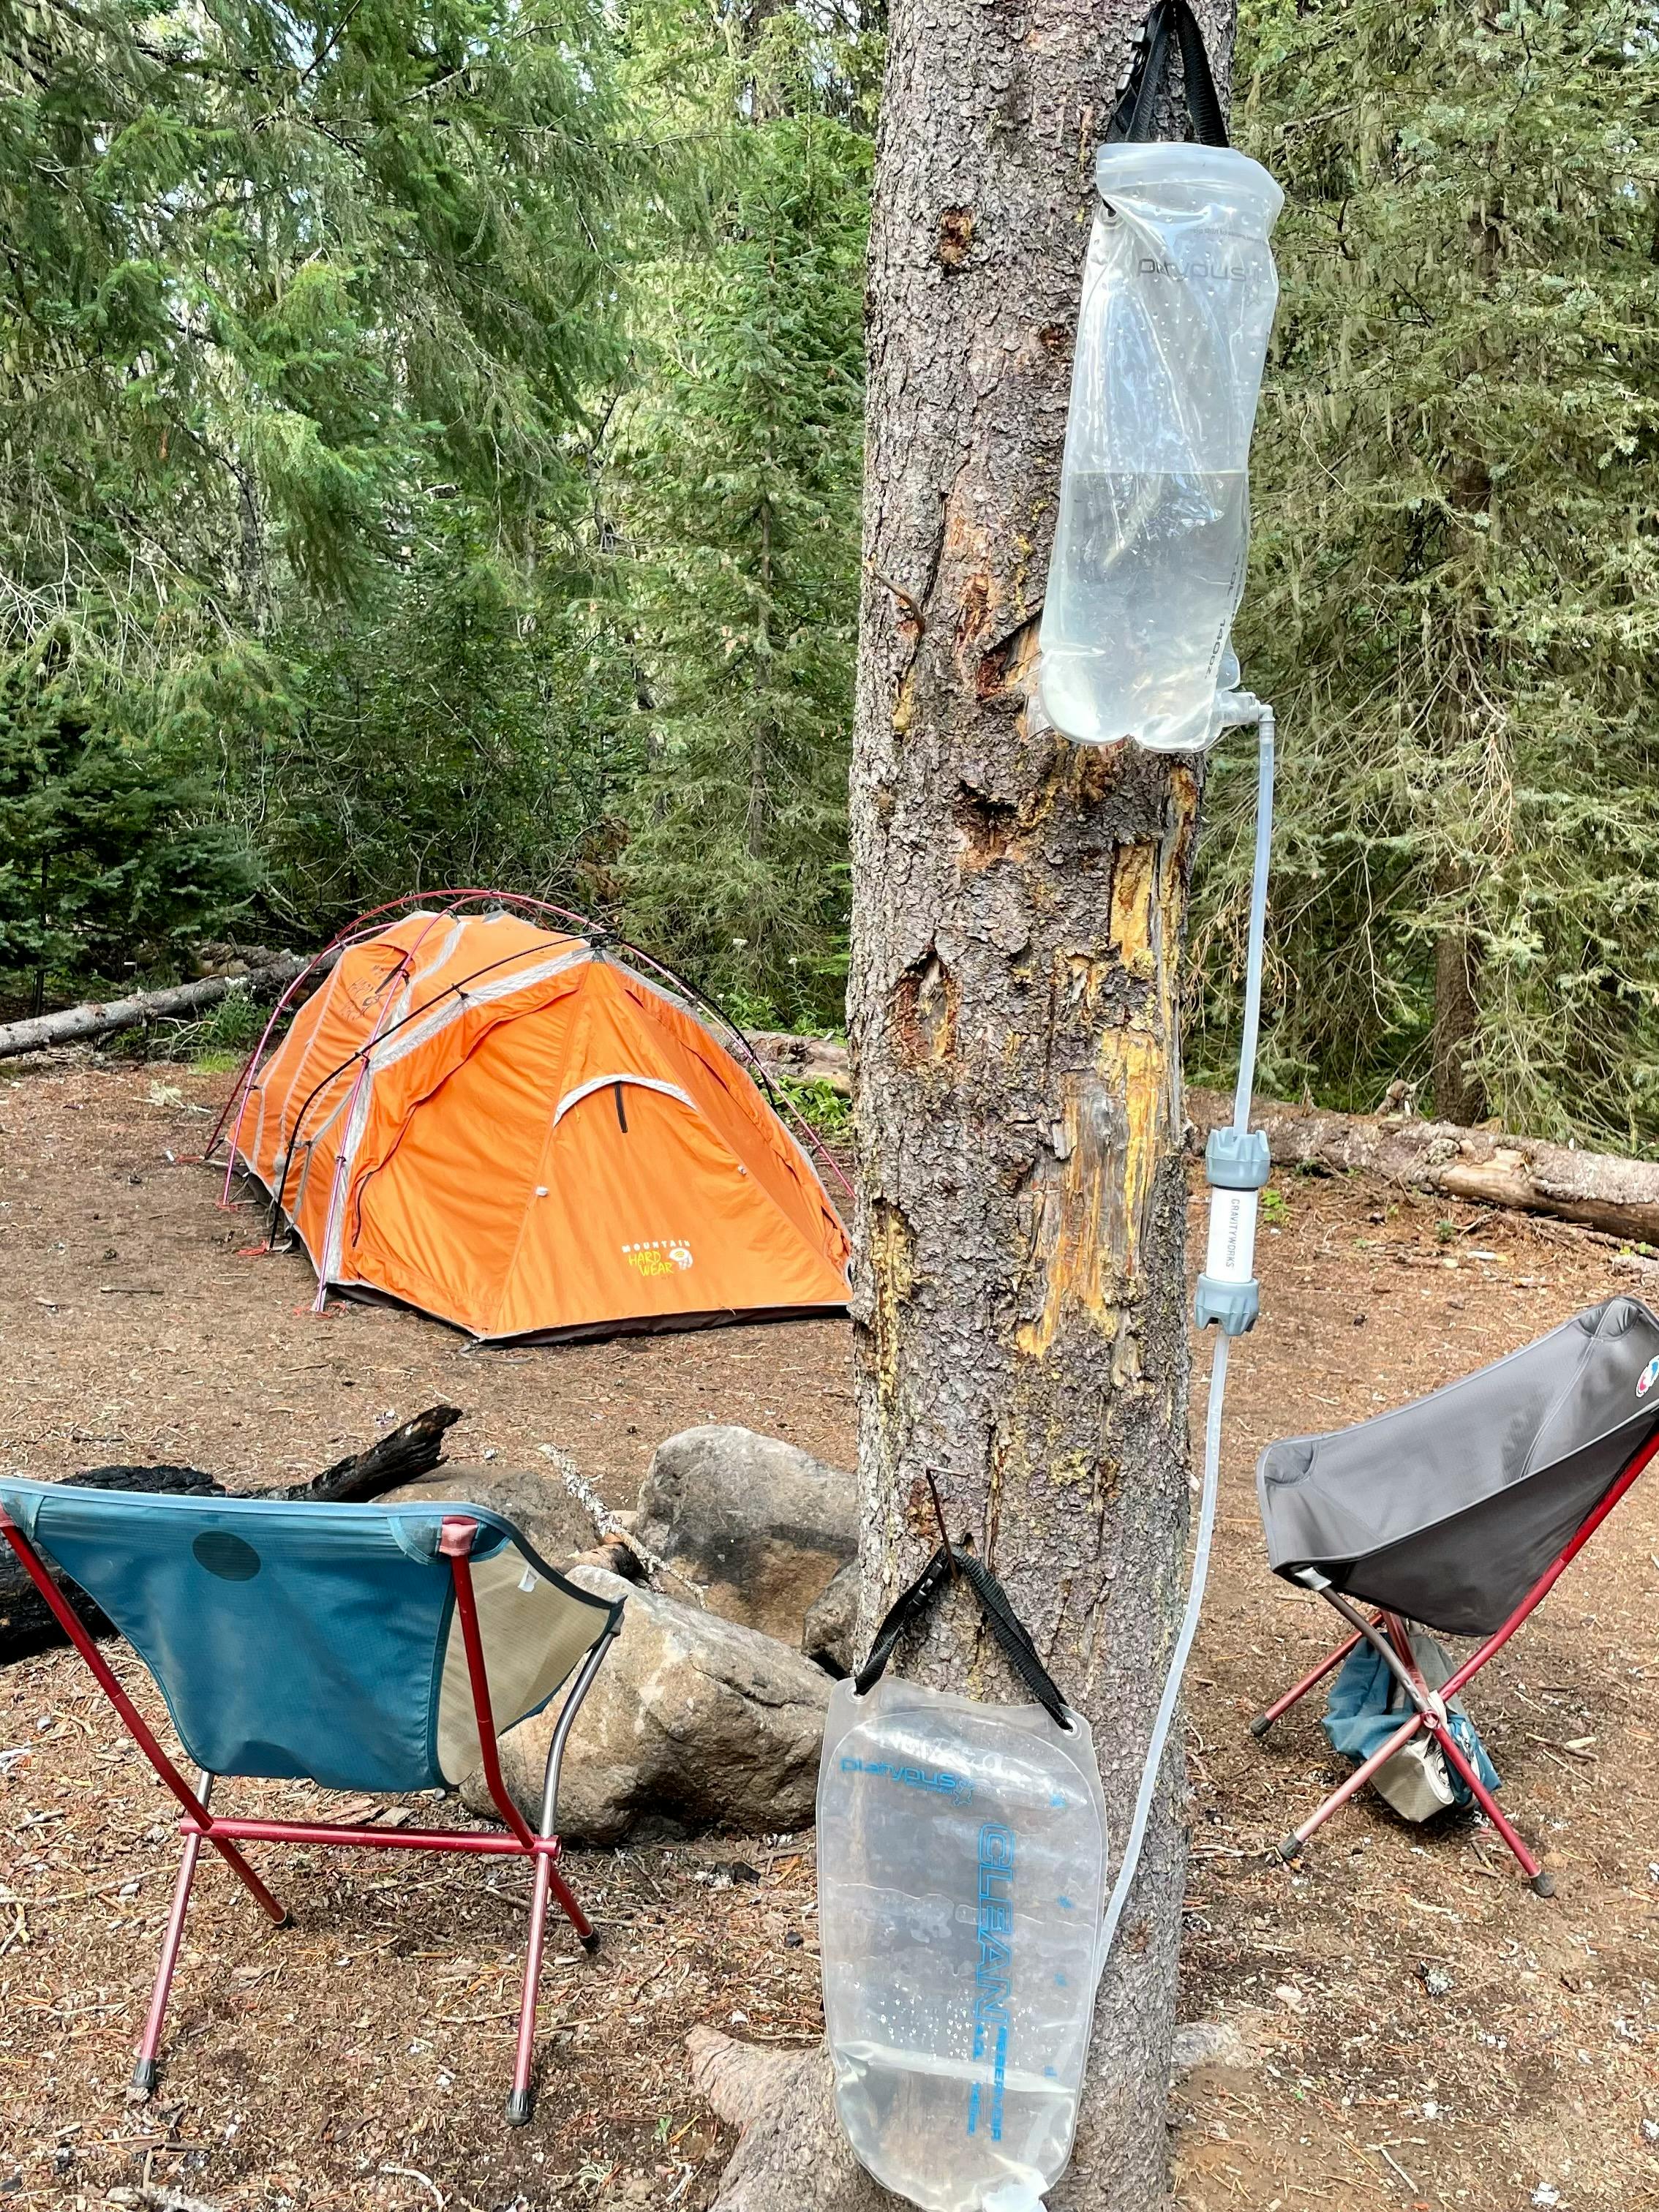 The author's Platypus GravityWorks system hanging from a tree with their campground set up in the background.